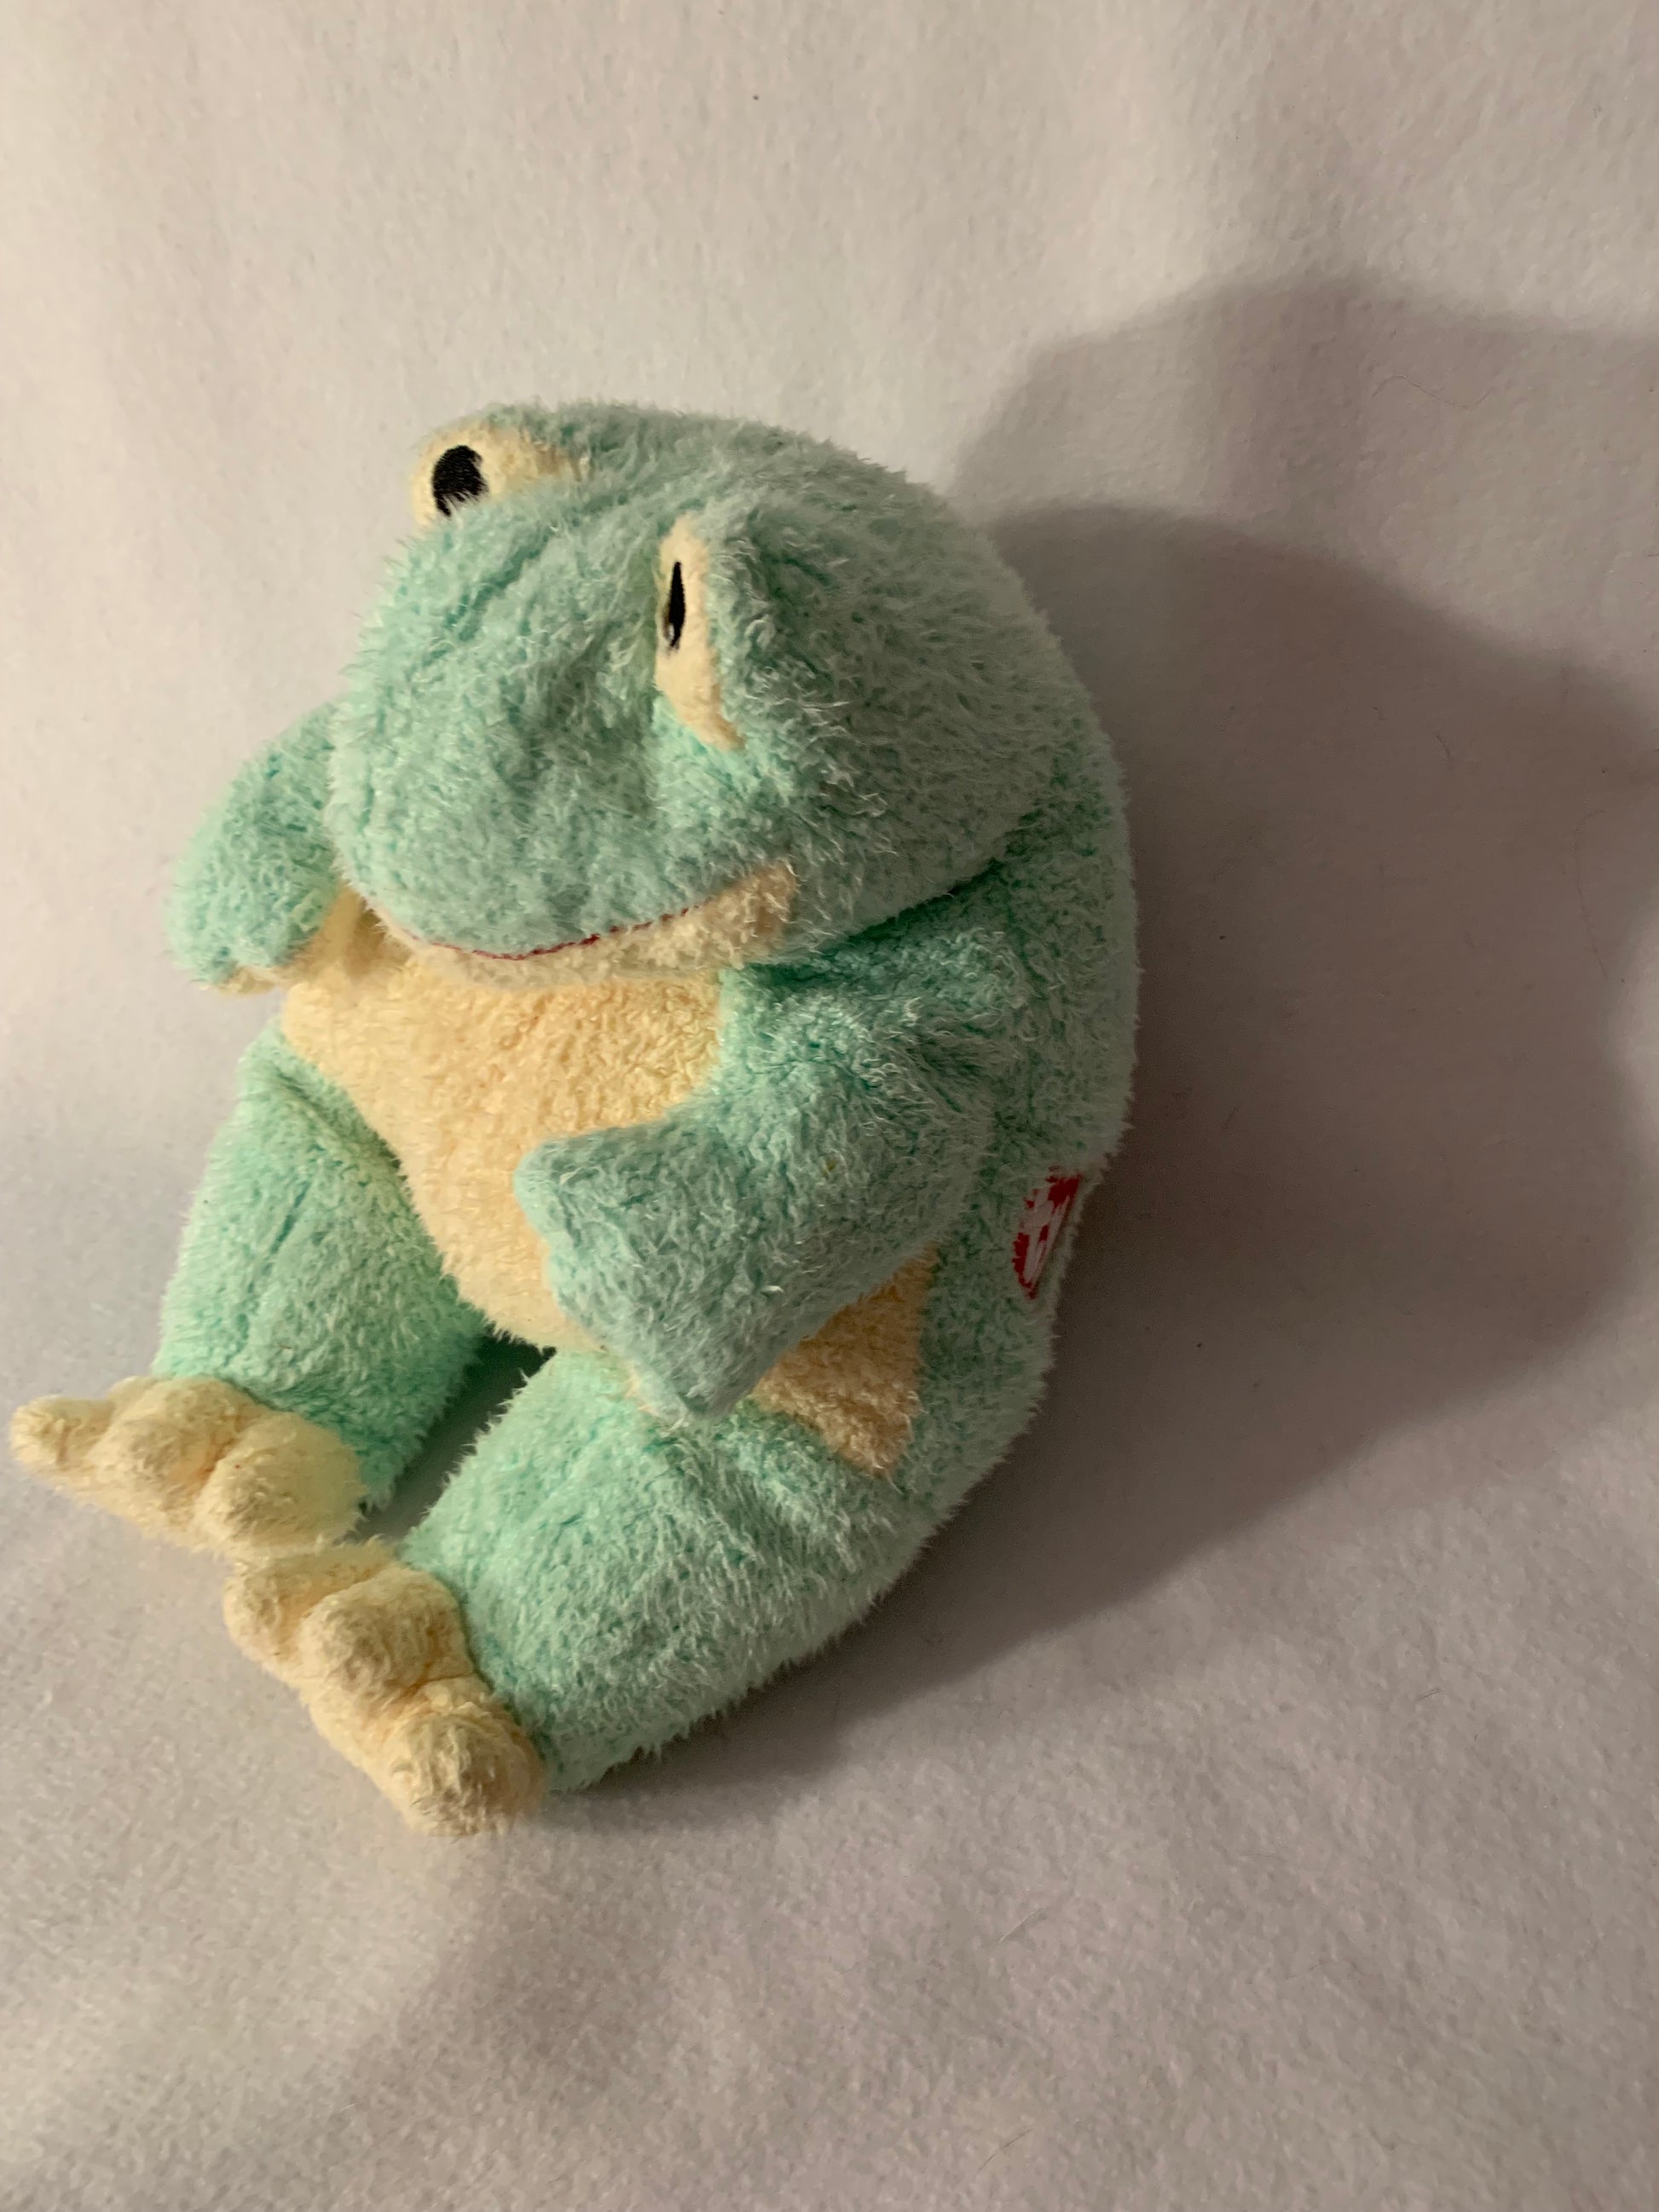 Weighted stuffed animal - frog, dog, pig, elephant or bear with 3